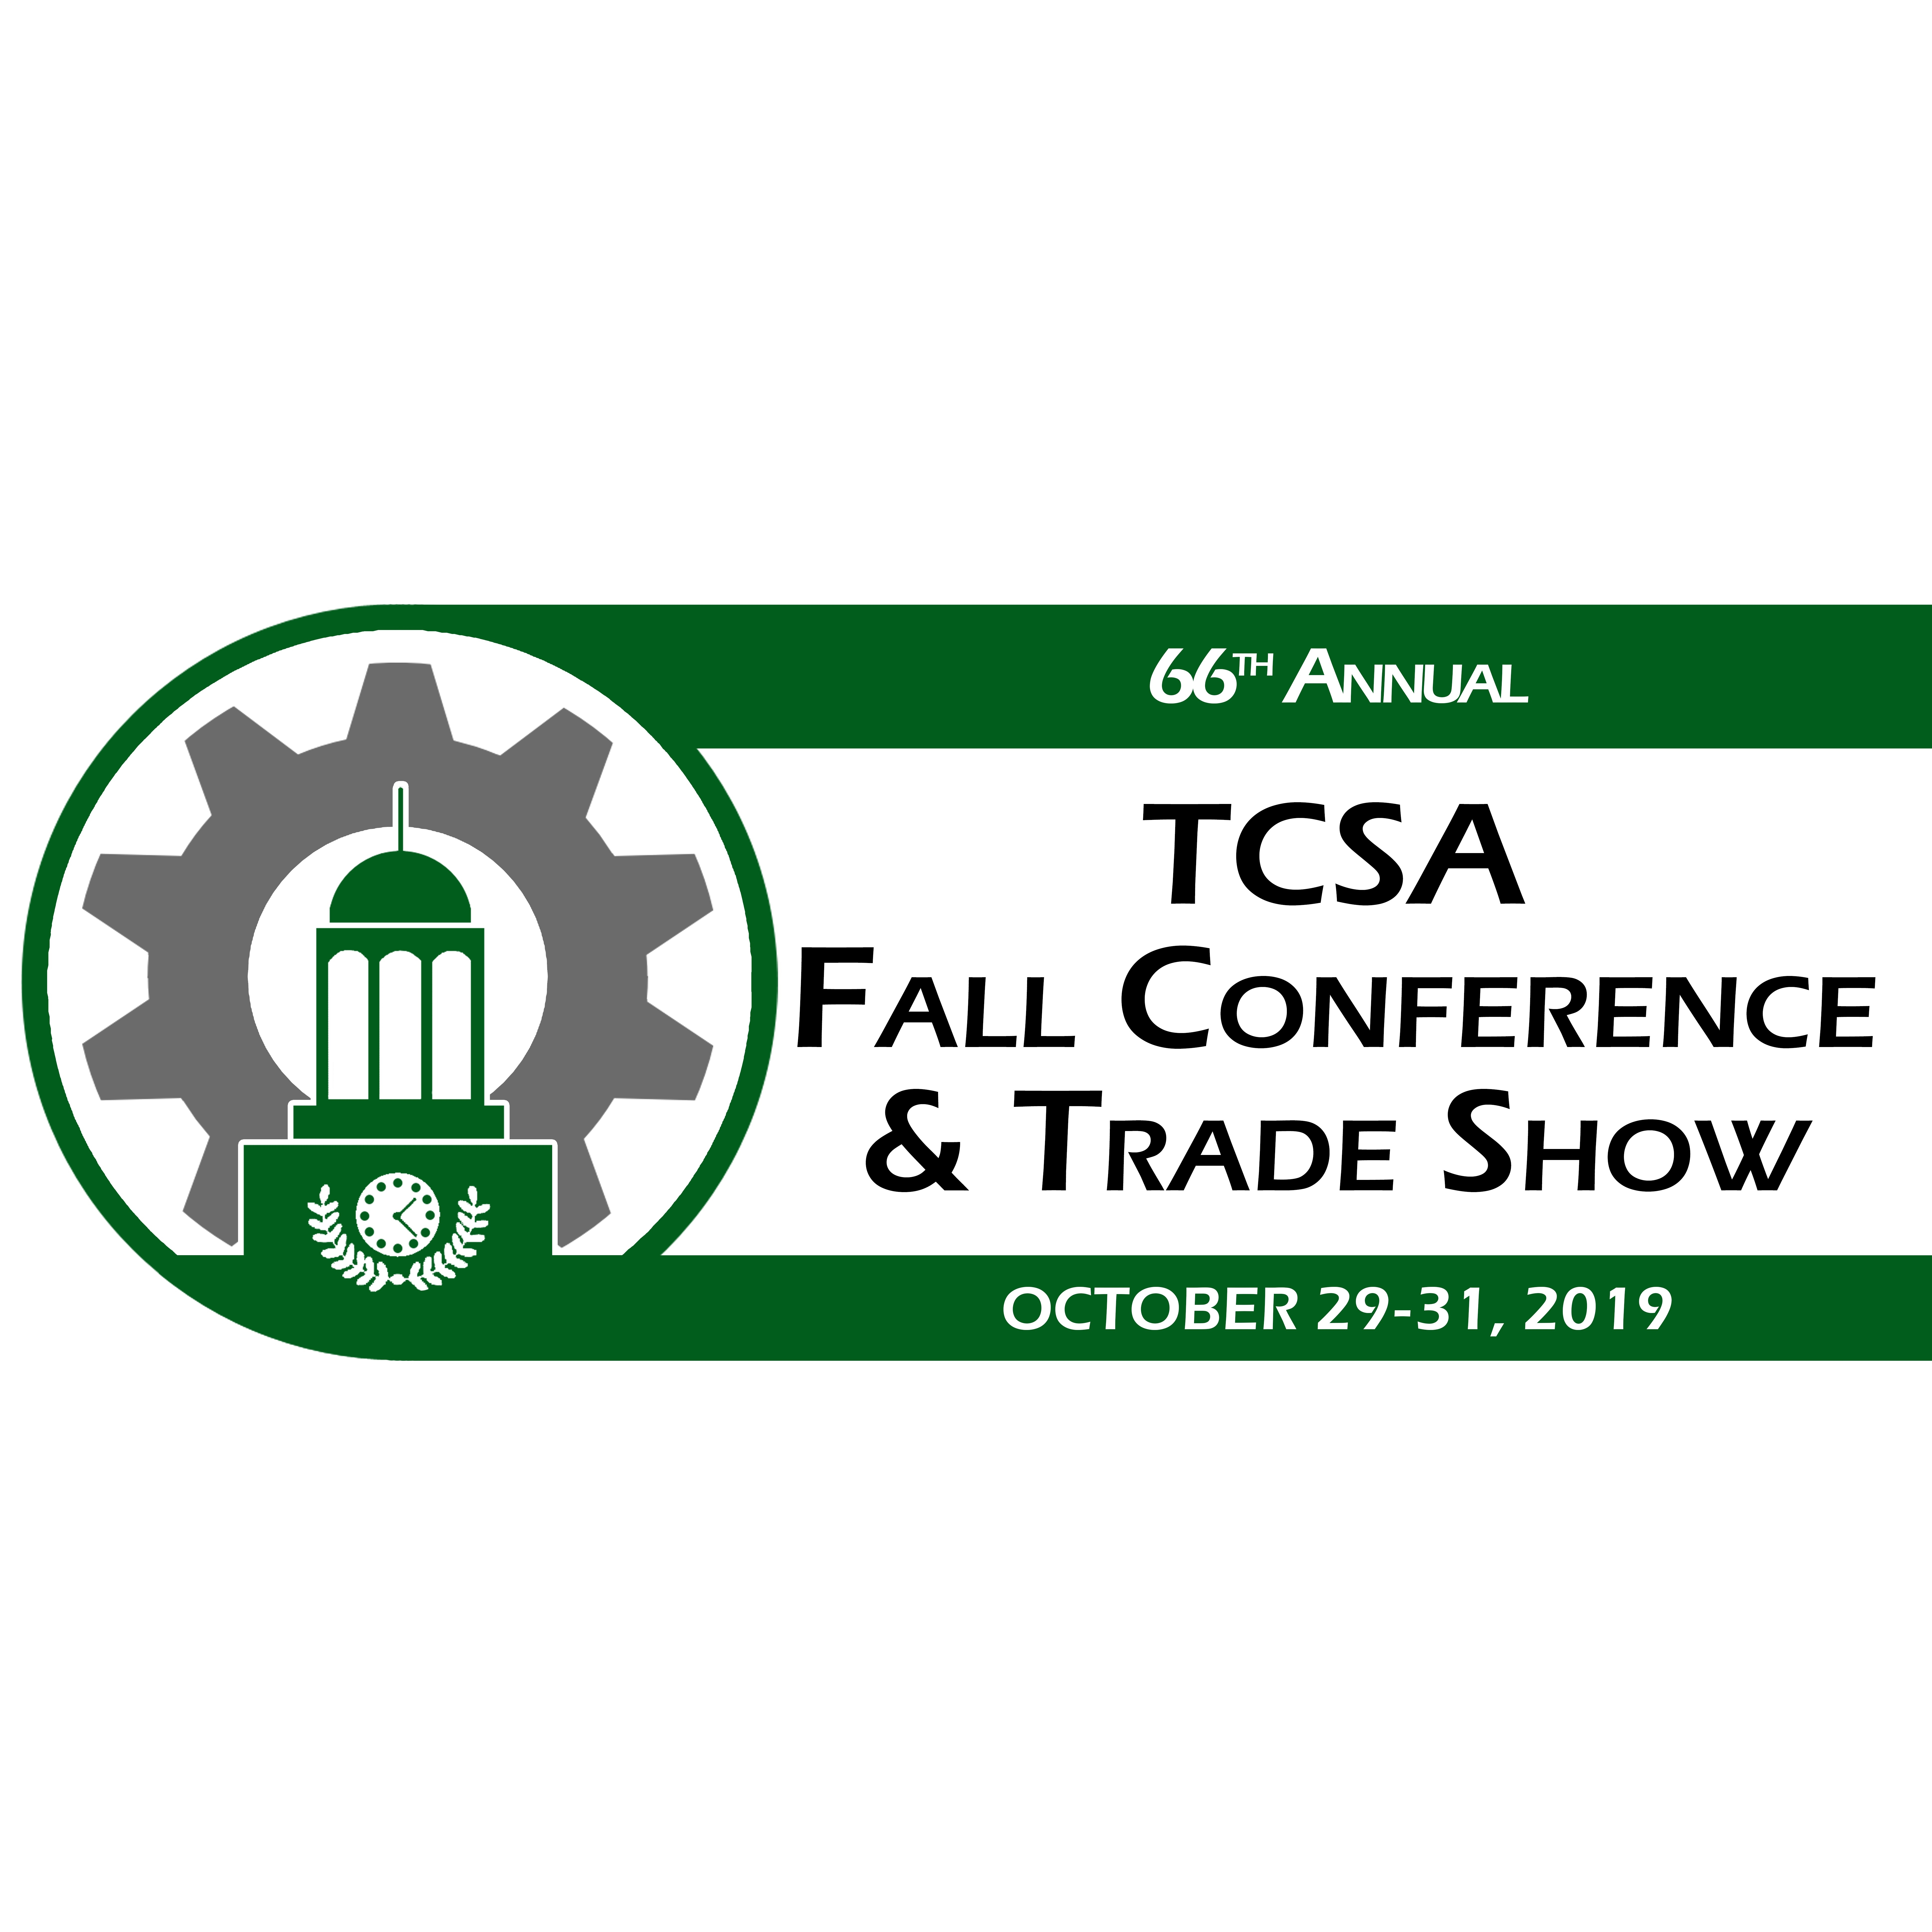 TCSA 2019 Fall Conference & Trade Show